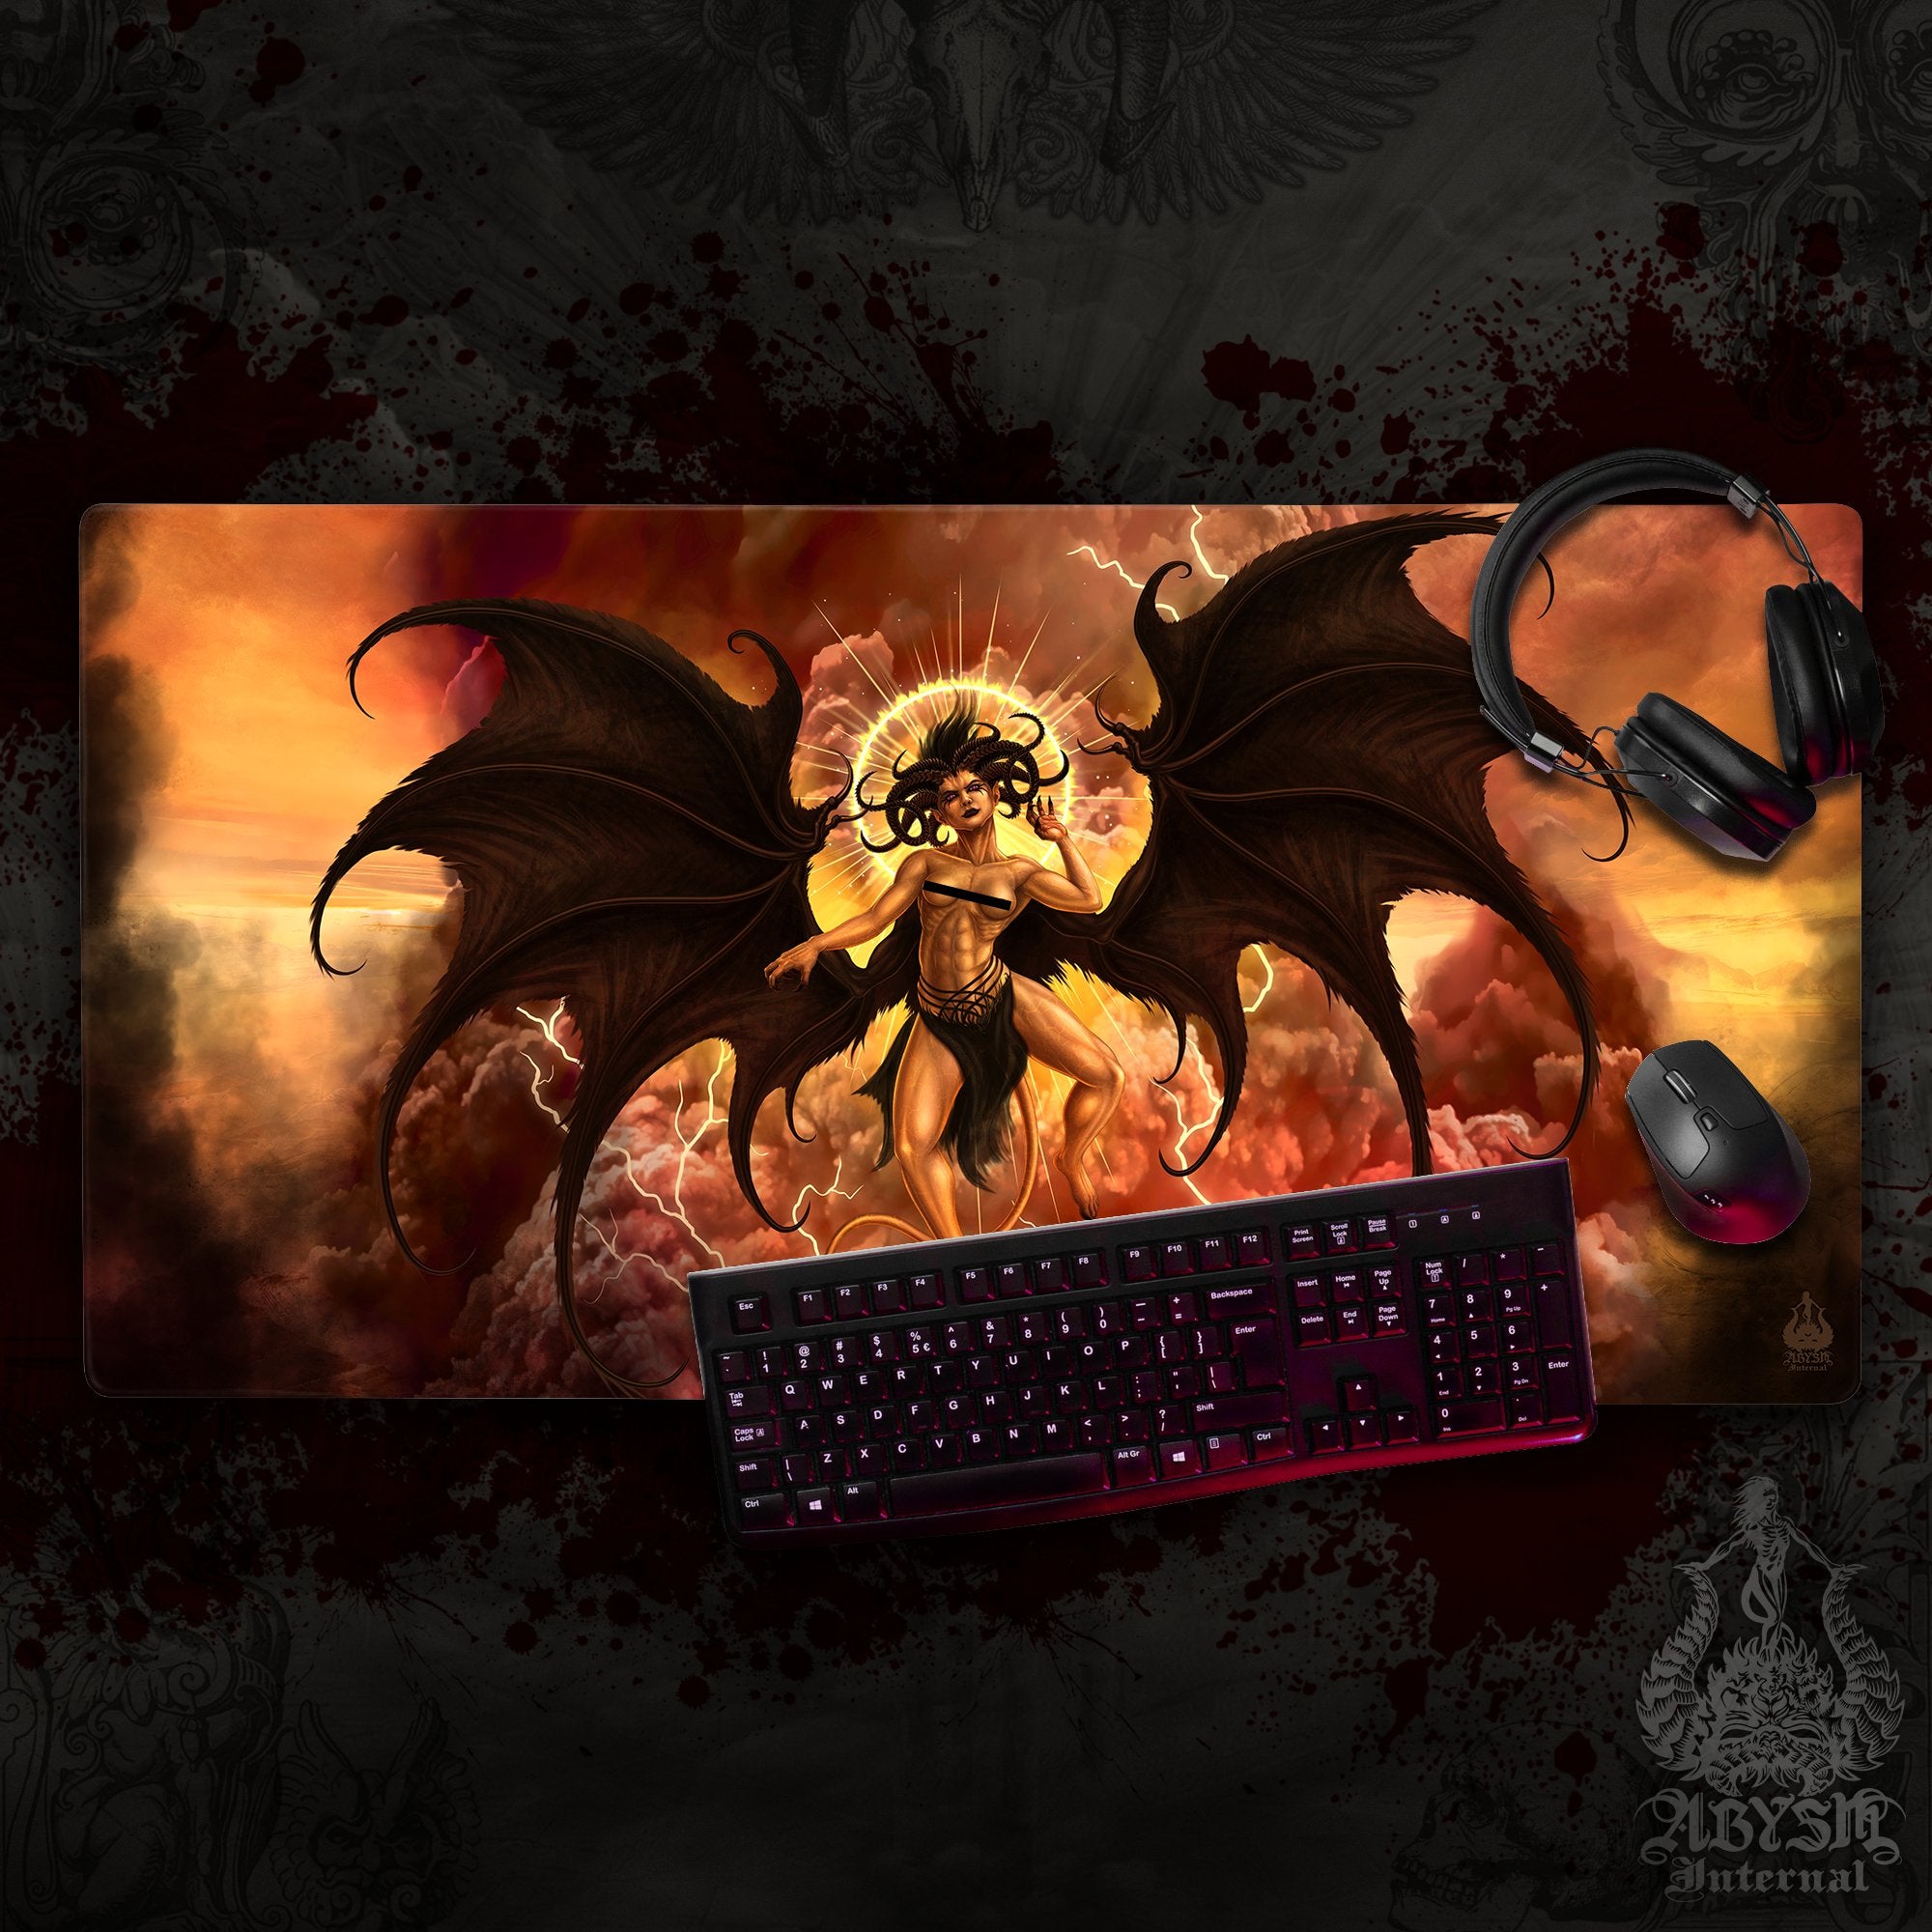 Lilith Gaming Mouse Pad, Demon Desk Mat, Erotic Demoness Table Protector Cover, Satanic Workpad, Dark Fantasy Art Print - Clothed, Nude and Semi, 3 Options - Abysm Internal